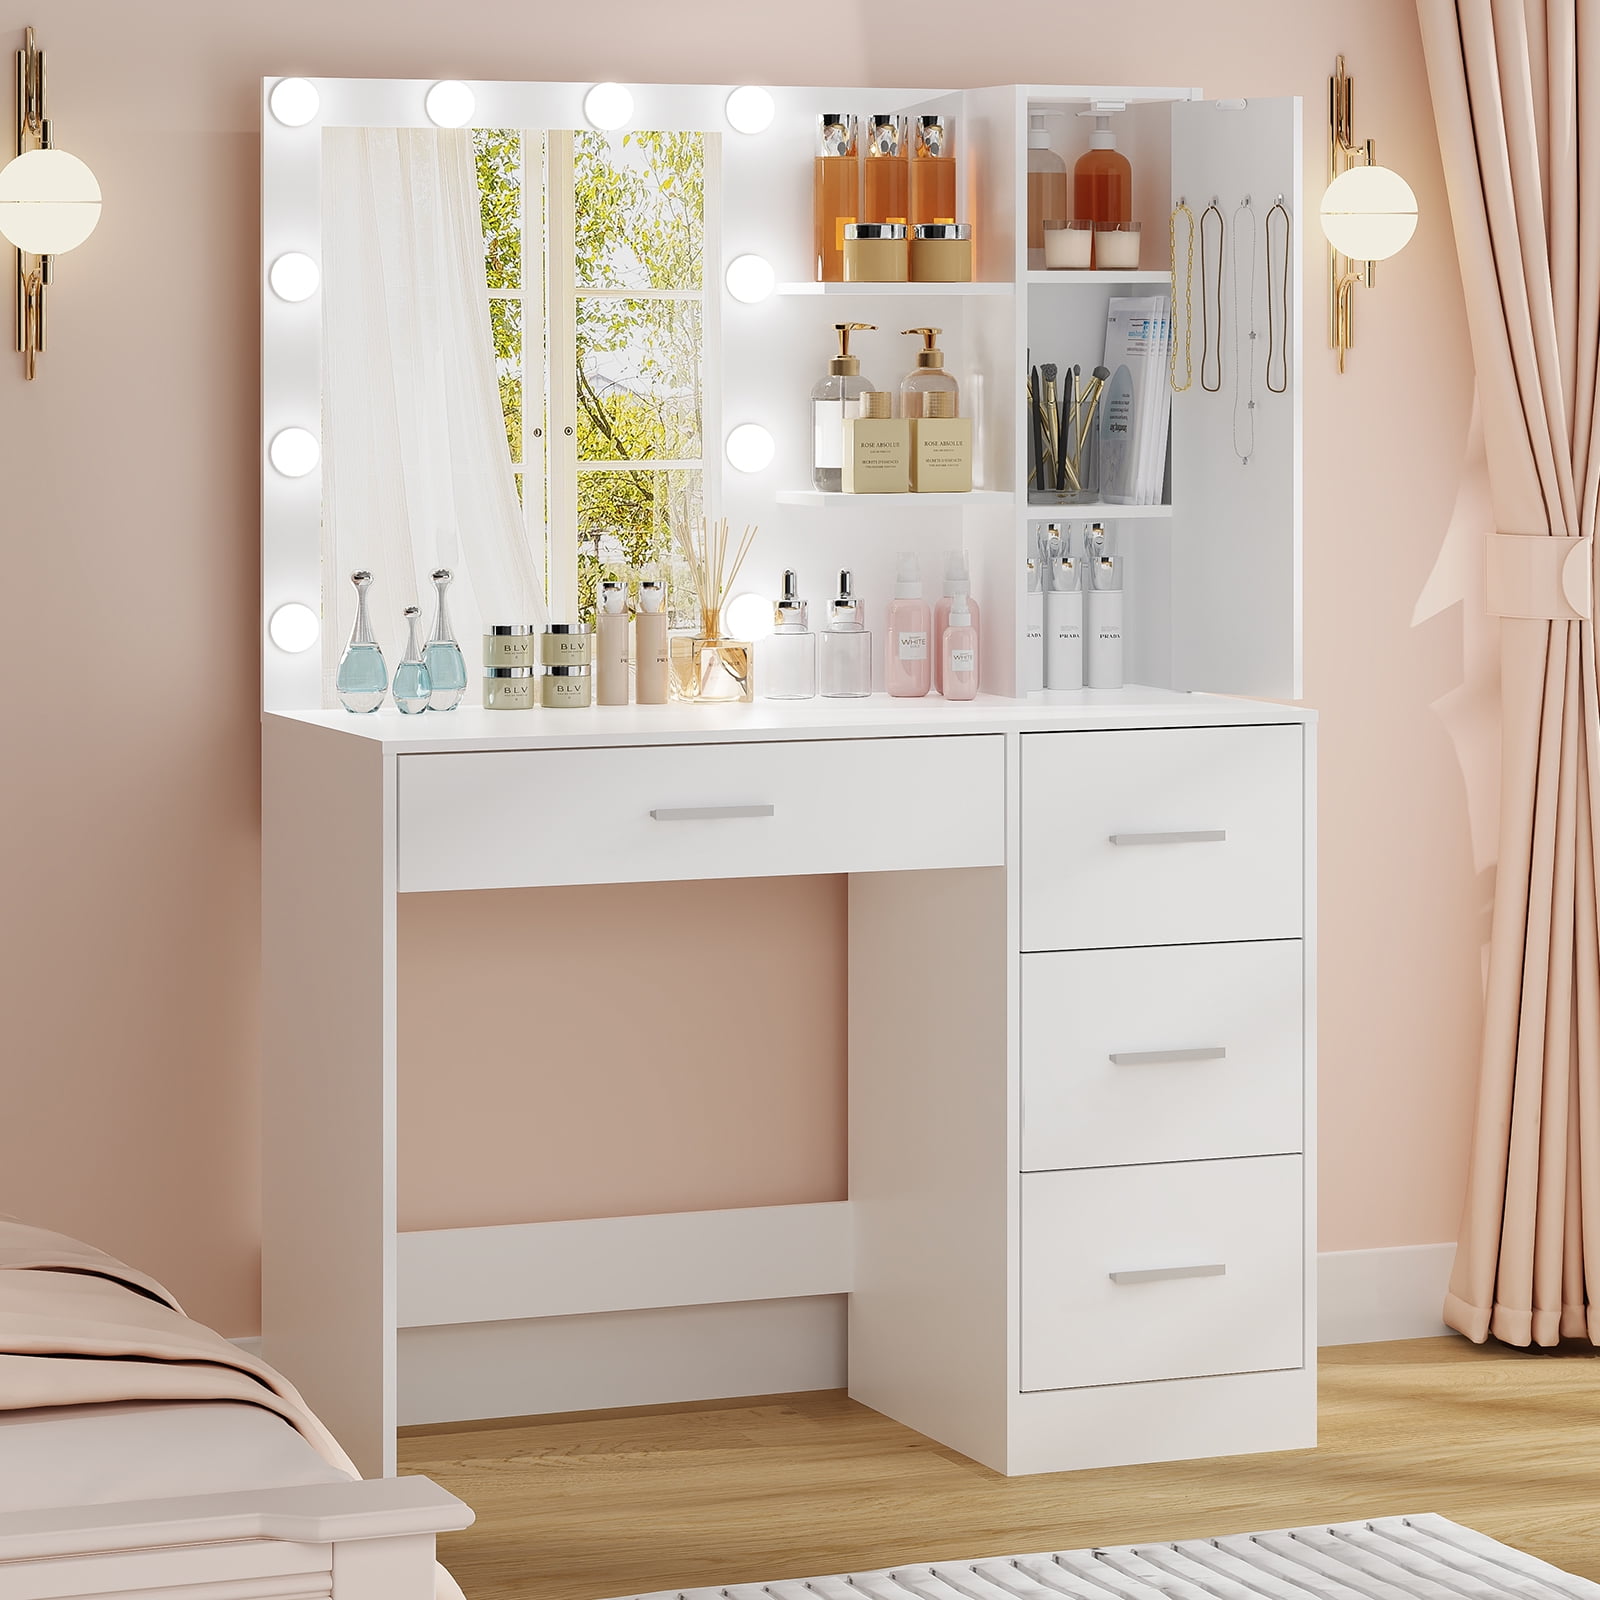 USIKEY Makeup Vanity with Lighted Mirror, Vanity Desk with 4 Drawers ...